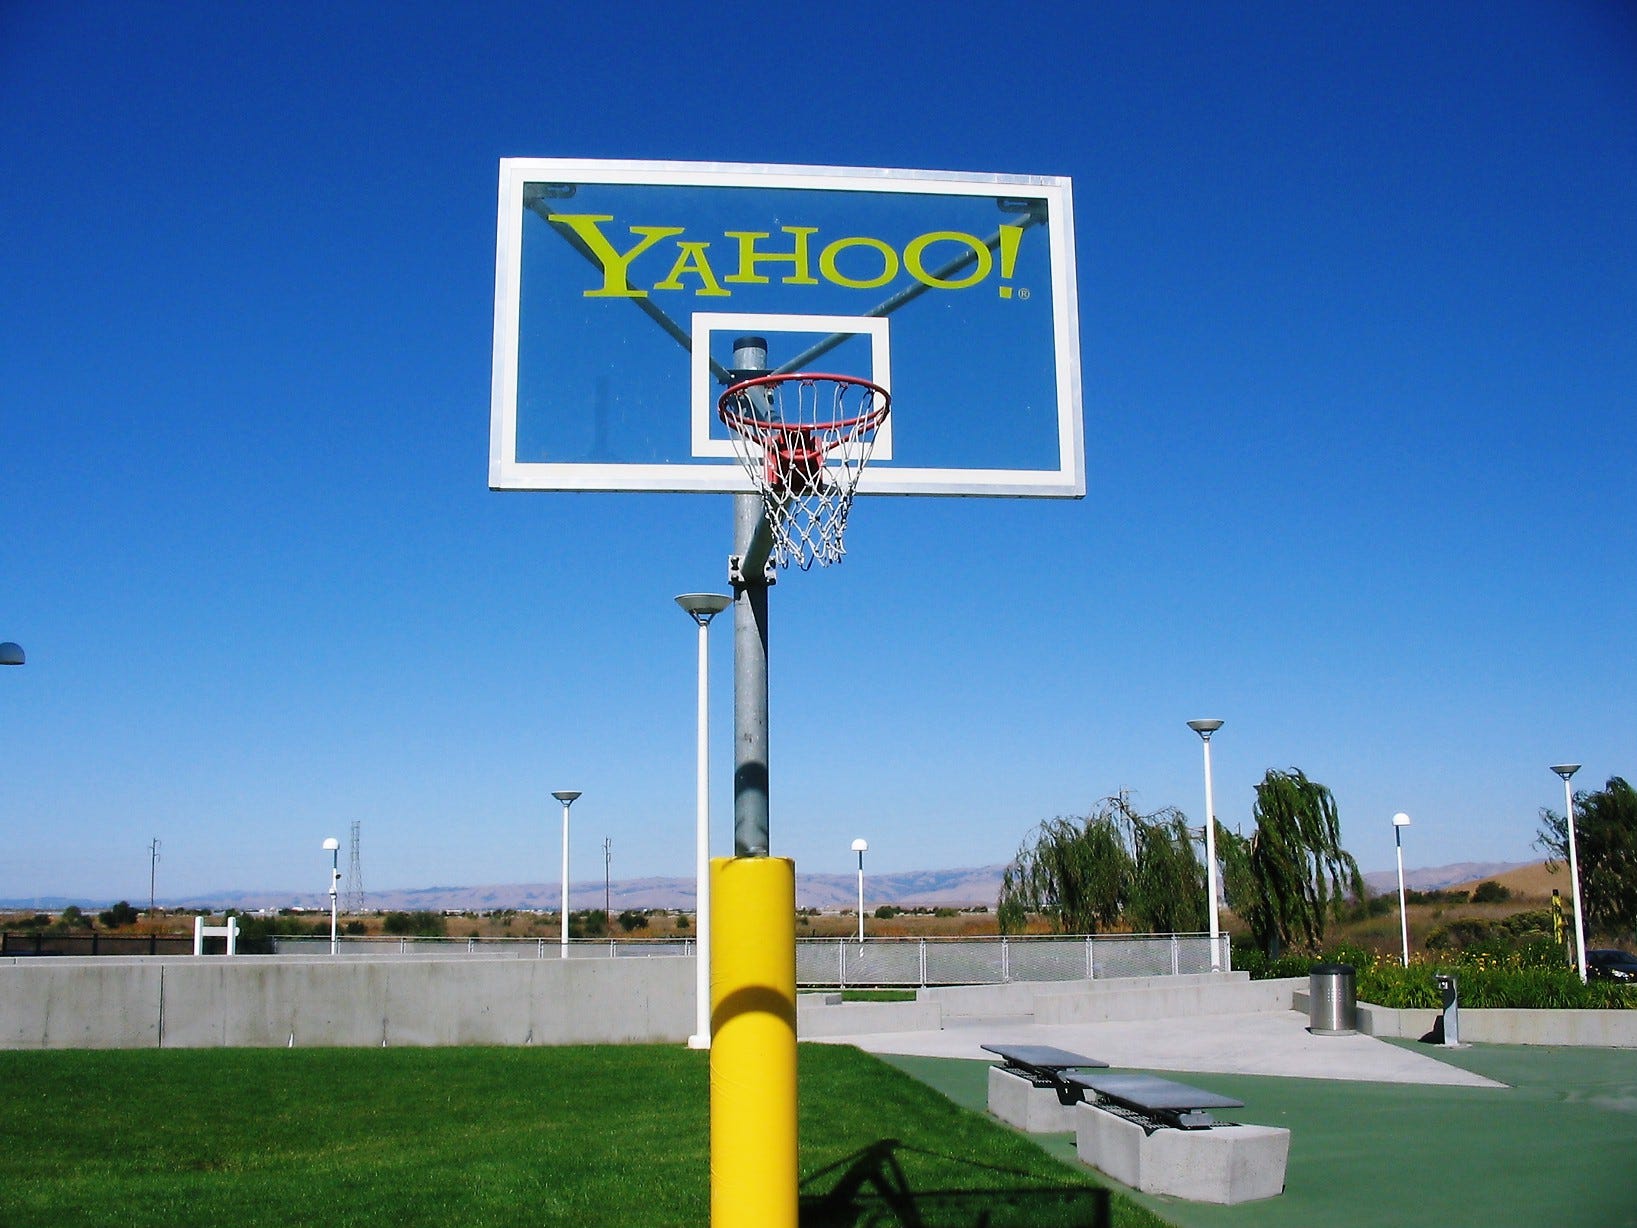 In 2005, I could easily imagine myself playing hoops in Sunnyvale, CA.